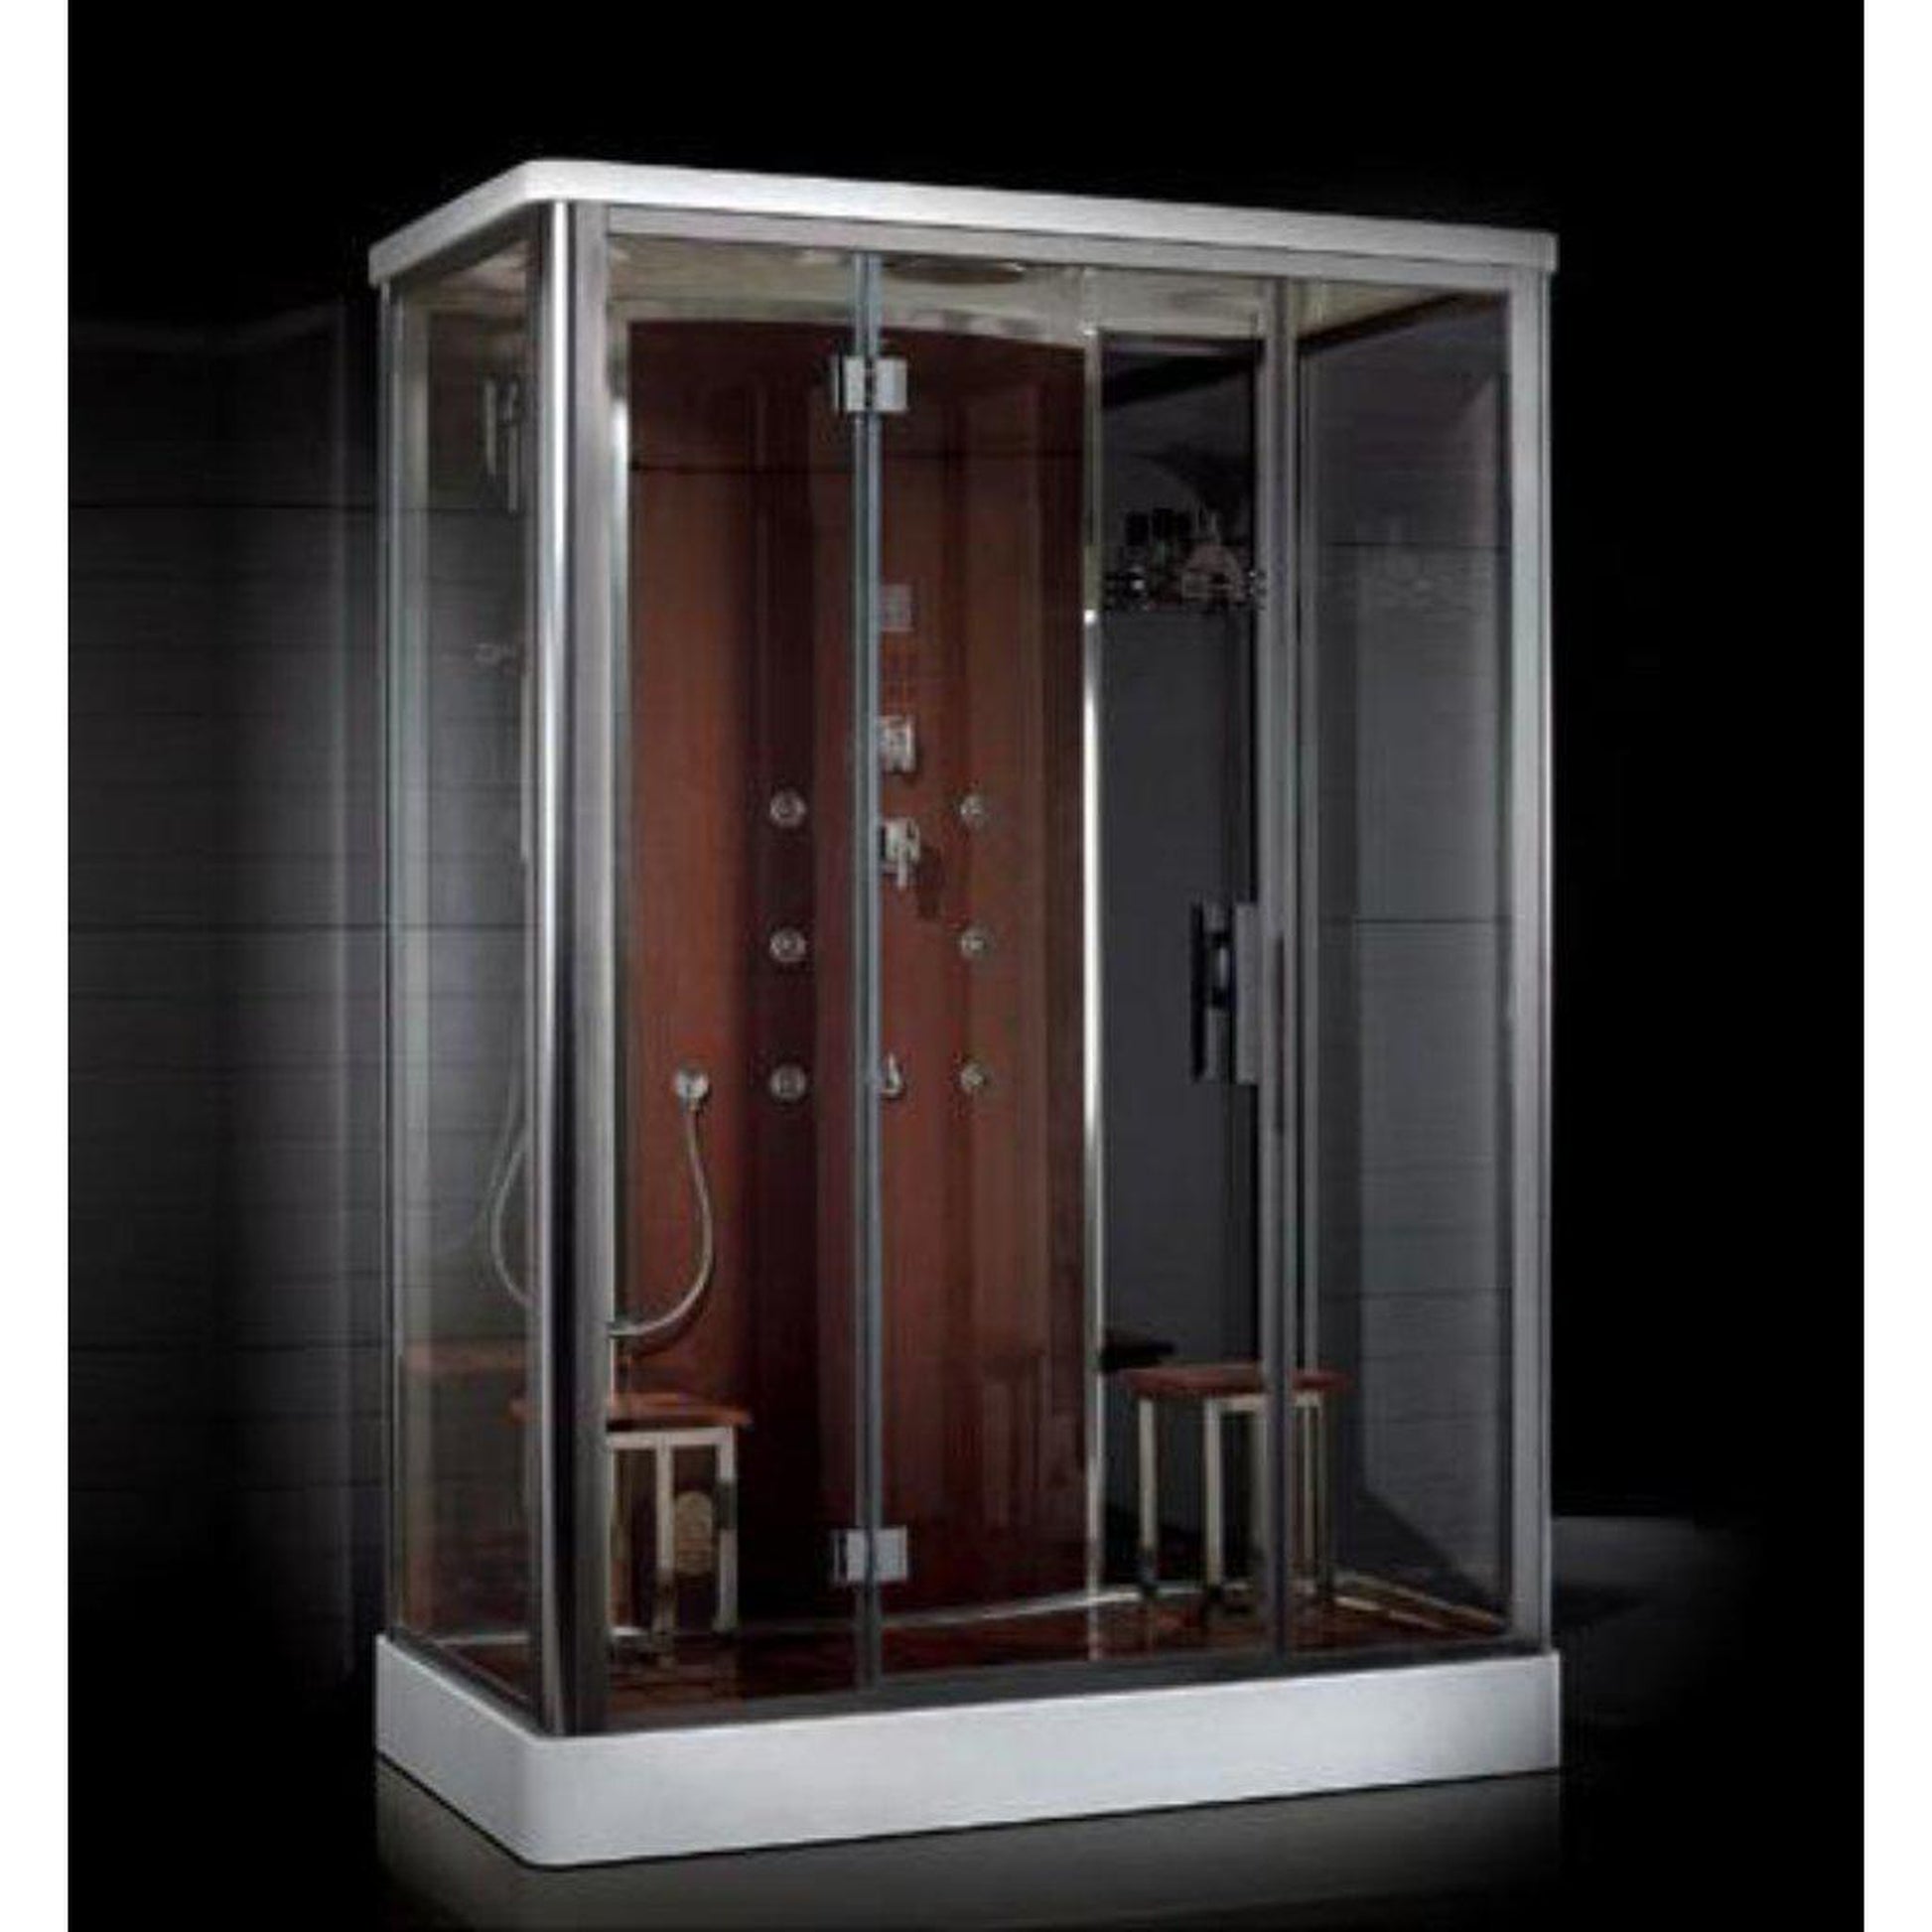 Platinum 59" x 35" x 87" Two-Person Brown Framed Rectangle Walk-In Steam Shower With Hinged Door 6 Massage Jets & LED Chromatherapy Lighting